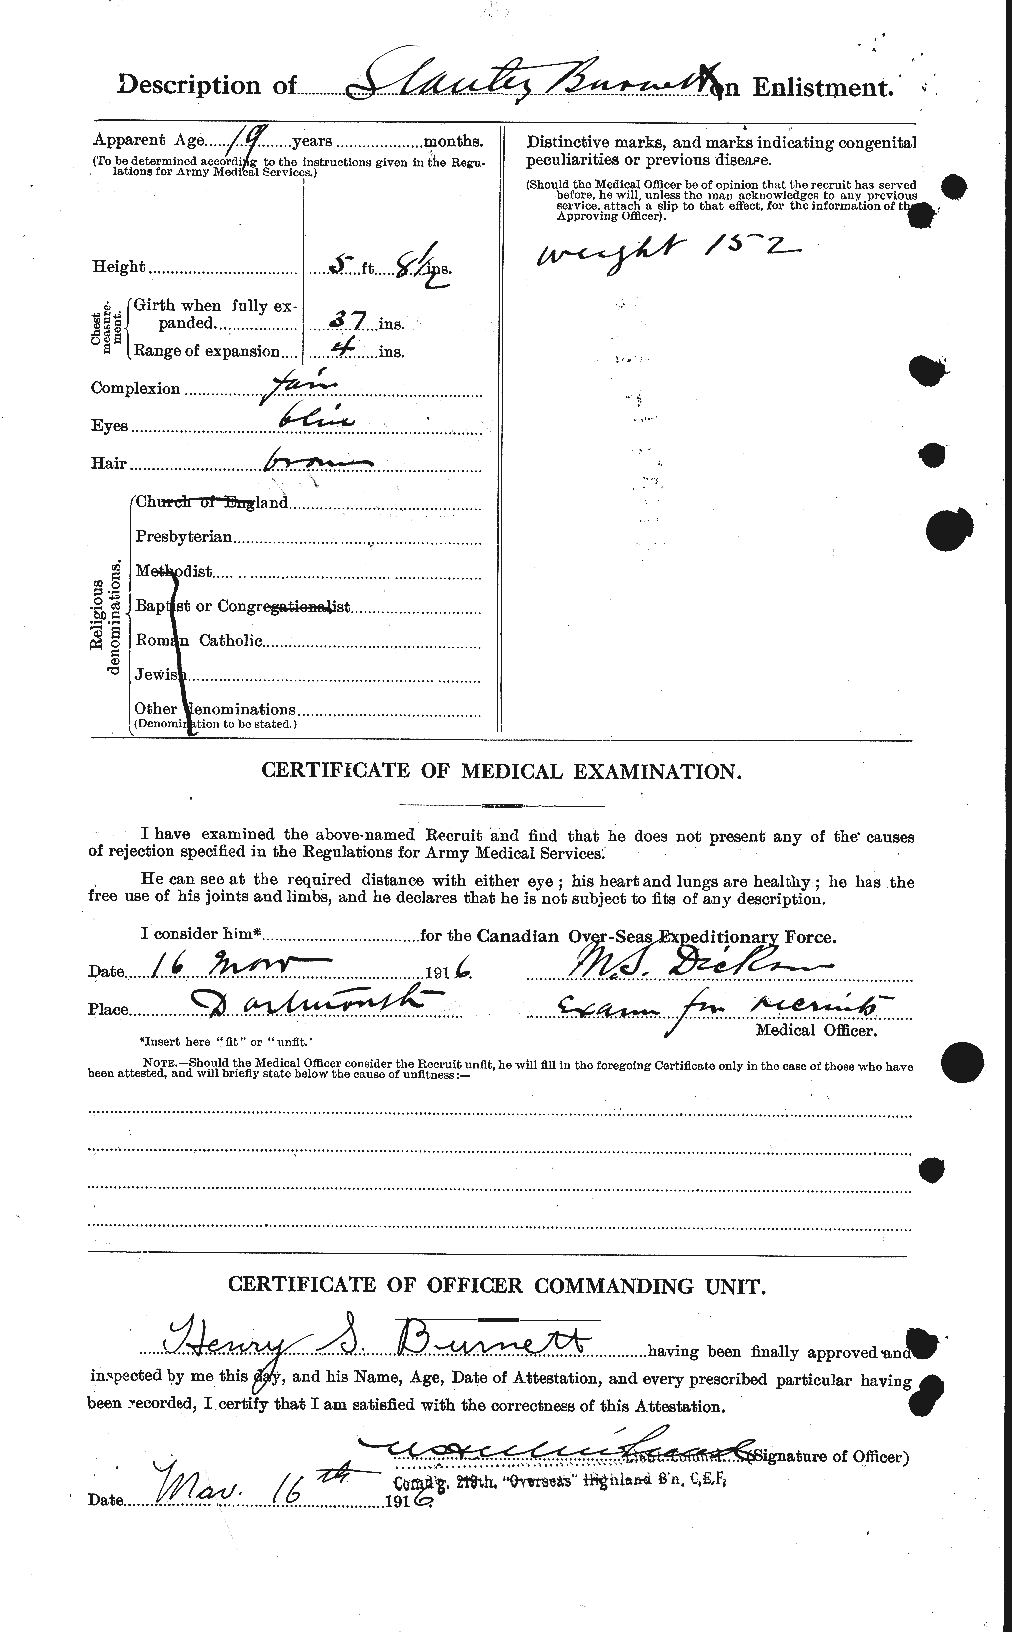 Personnel Records of the First World War - CEF 272108b